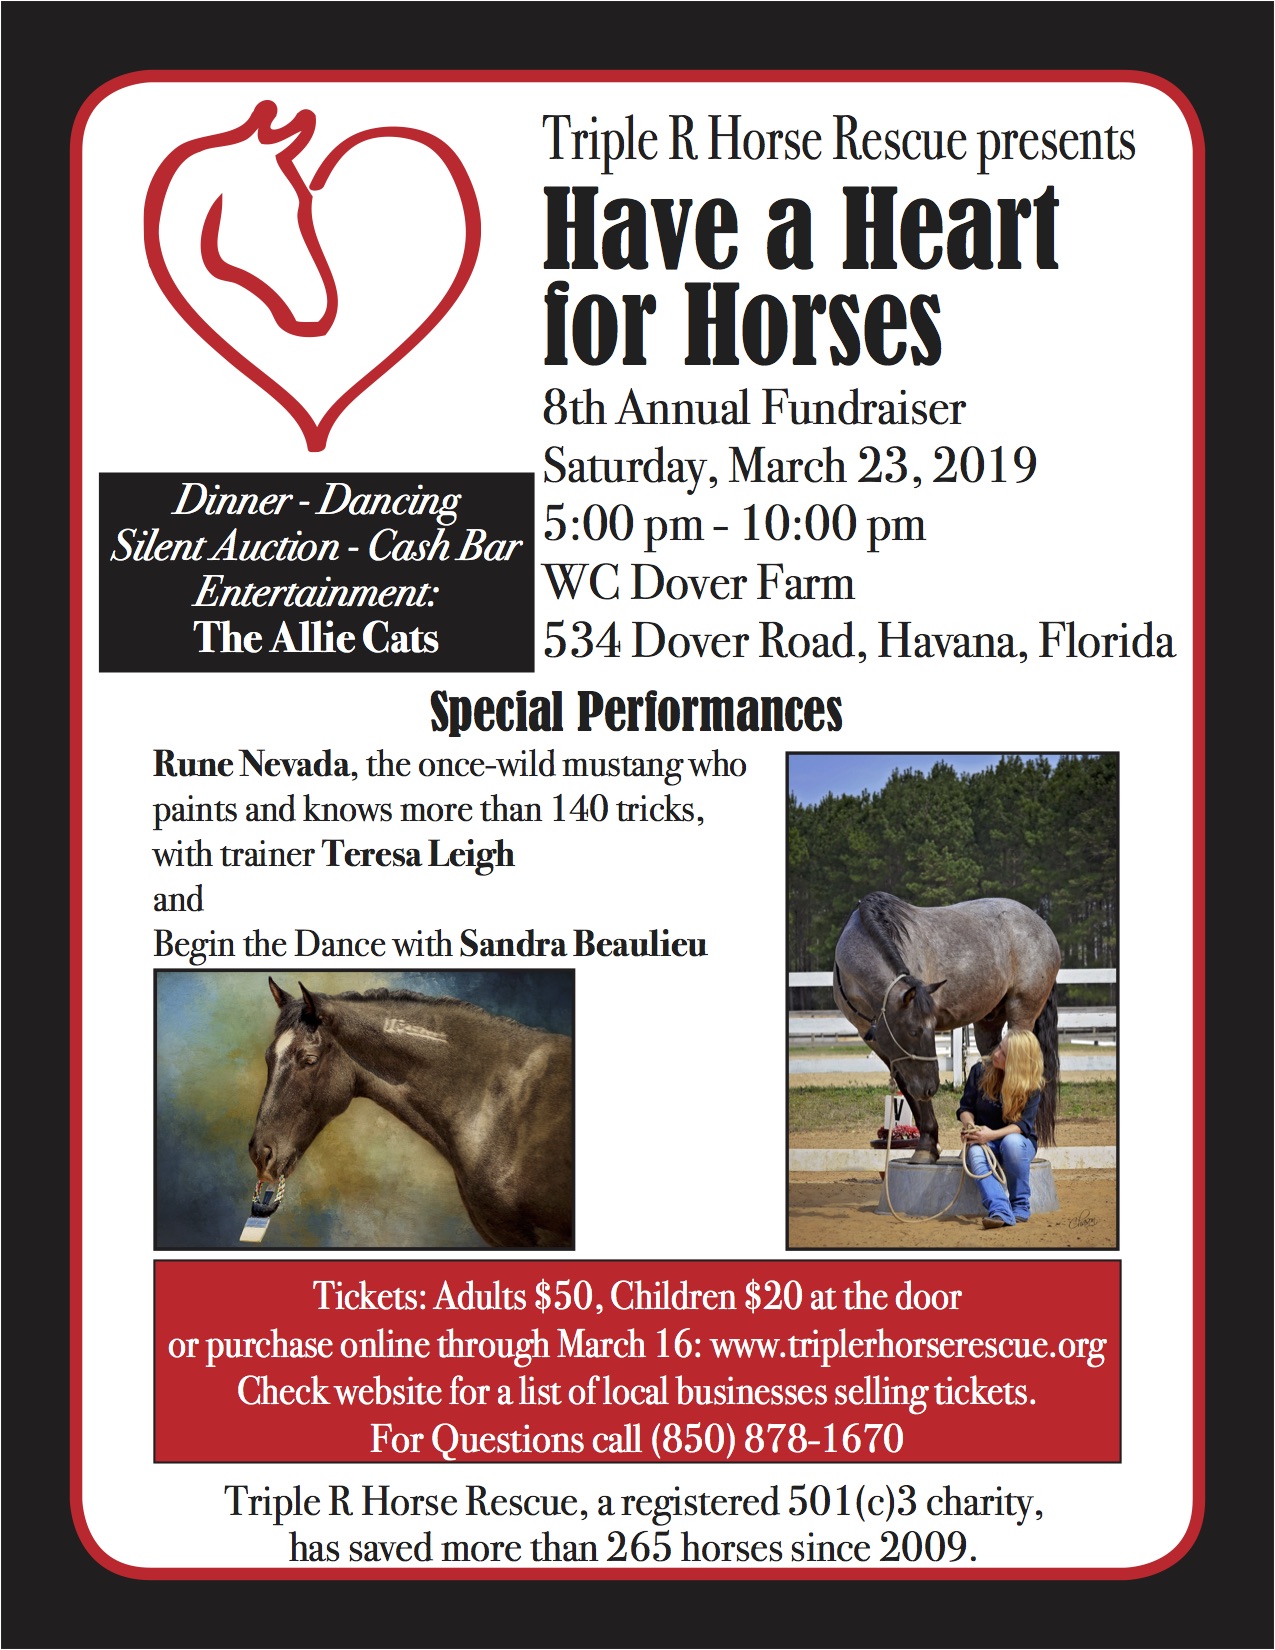 Triple R Horse Rescue: Have a Heart for Horses Fundraiser